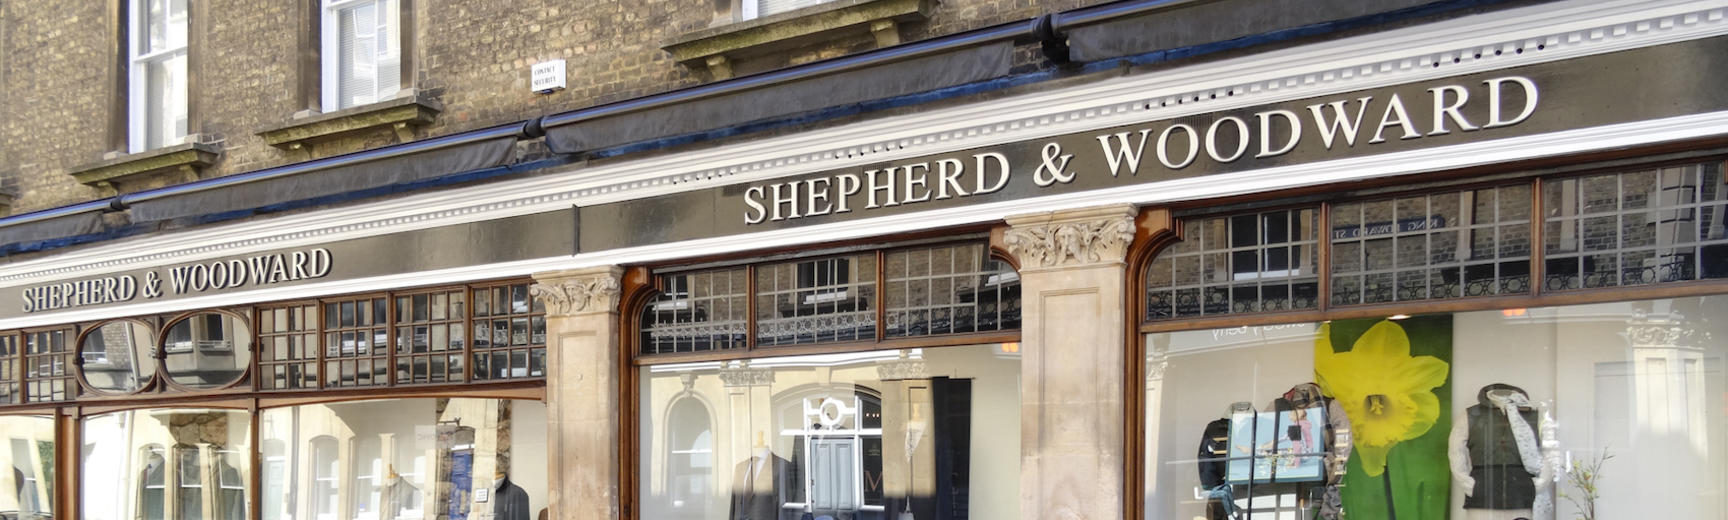 The exterior of the Shepherd and Woodward shop on King Edward's Street